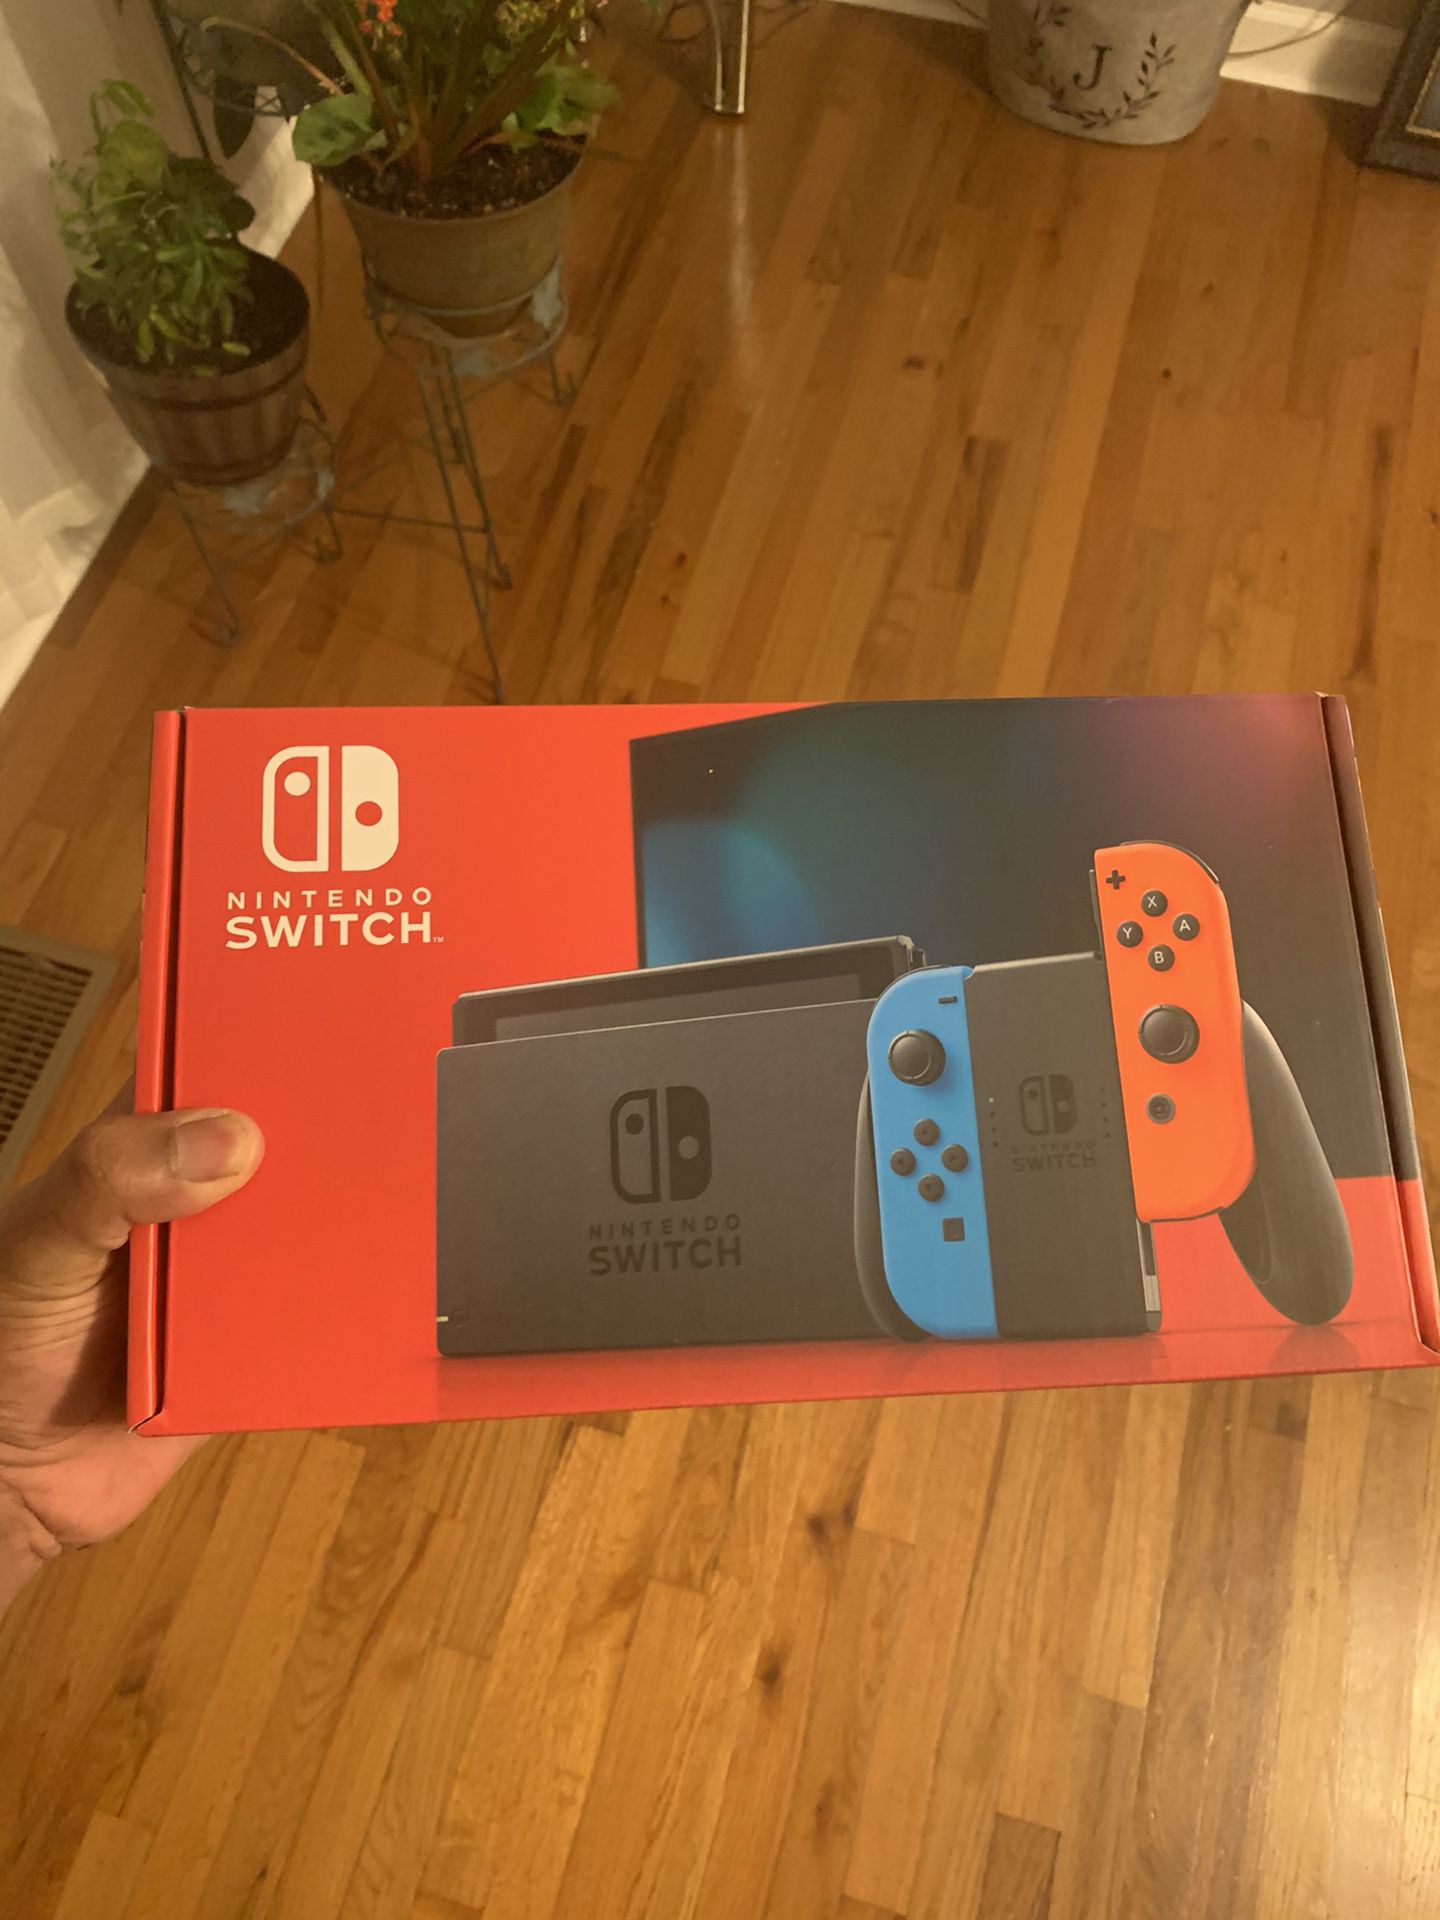 Nintendo switch brand new with color controllers